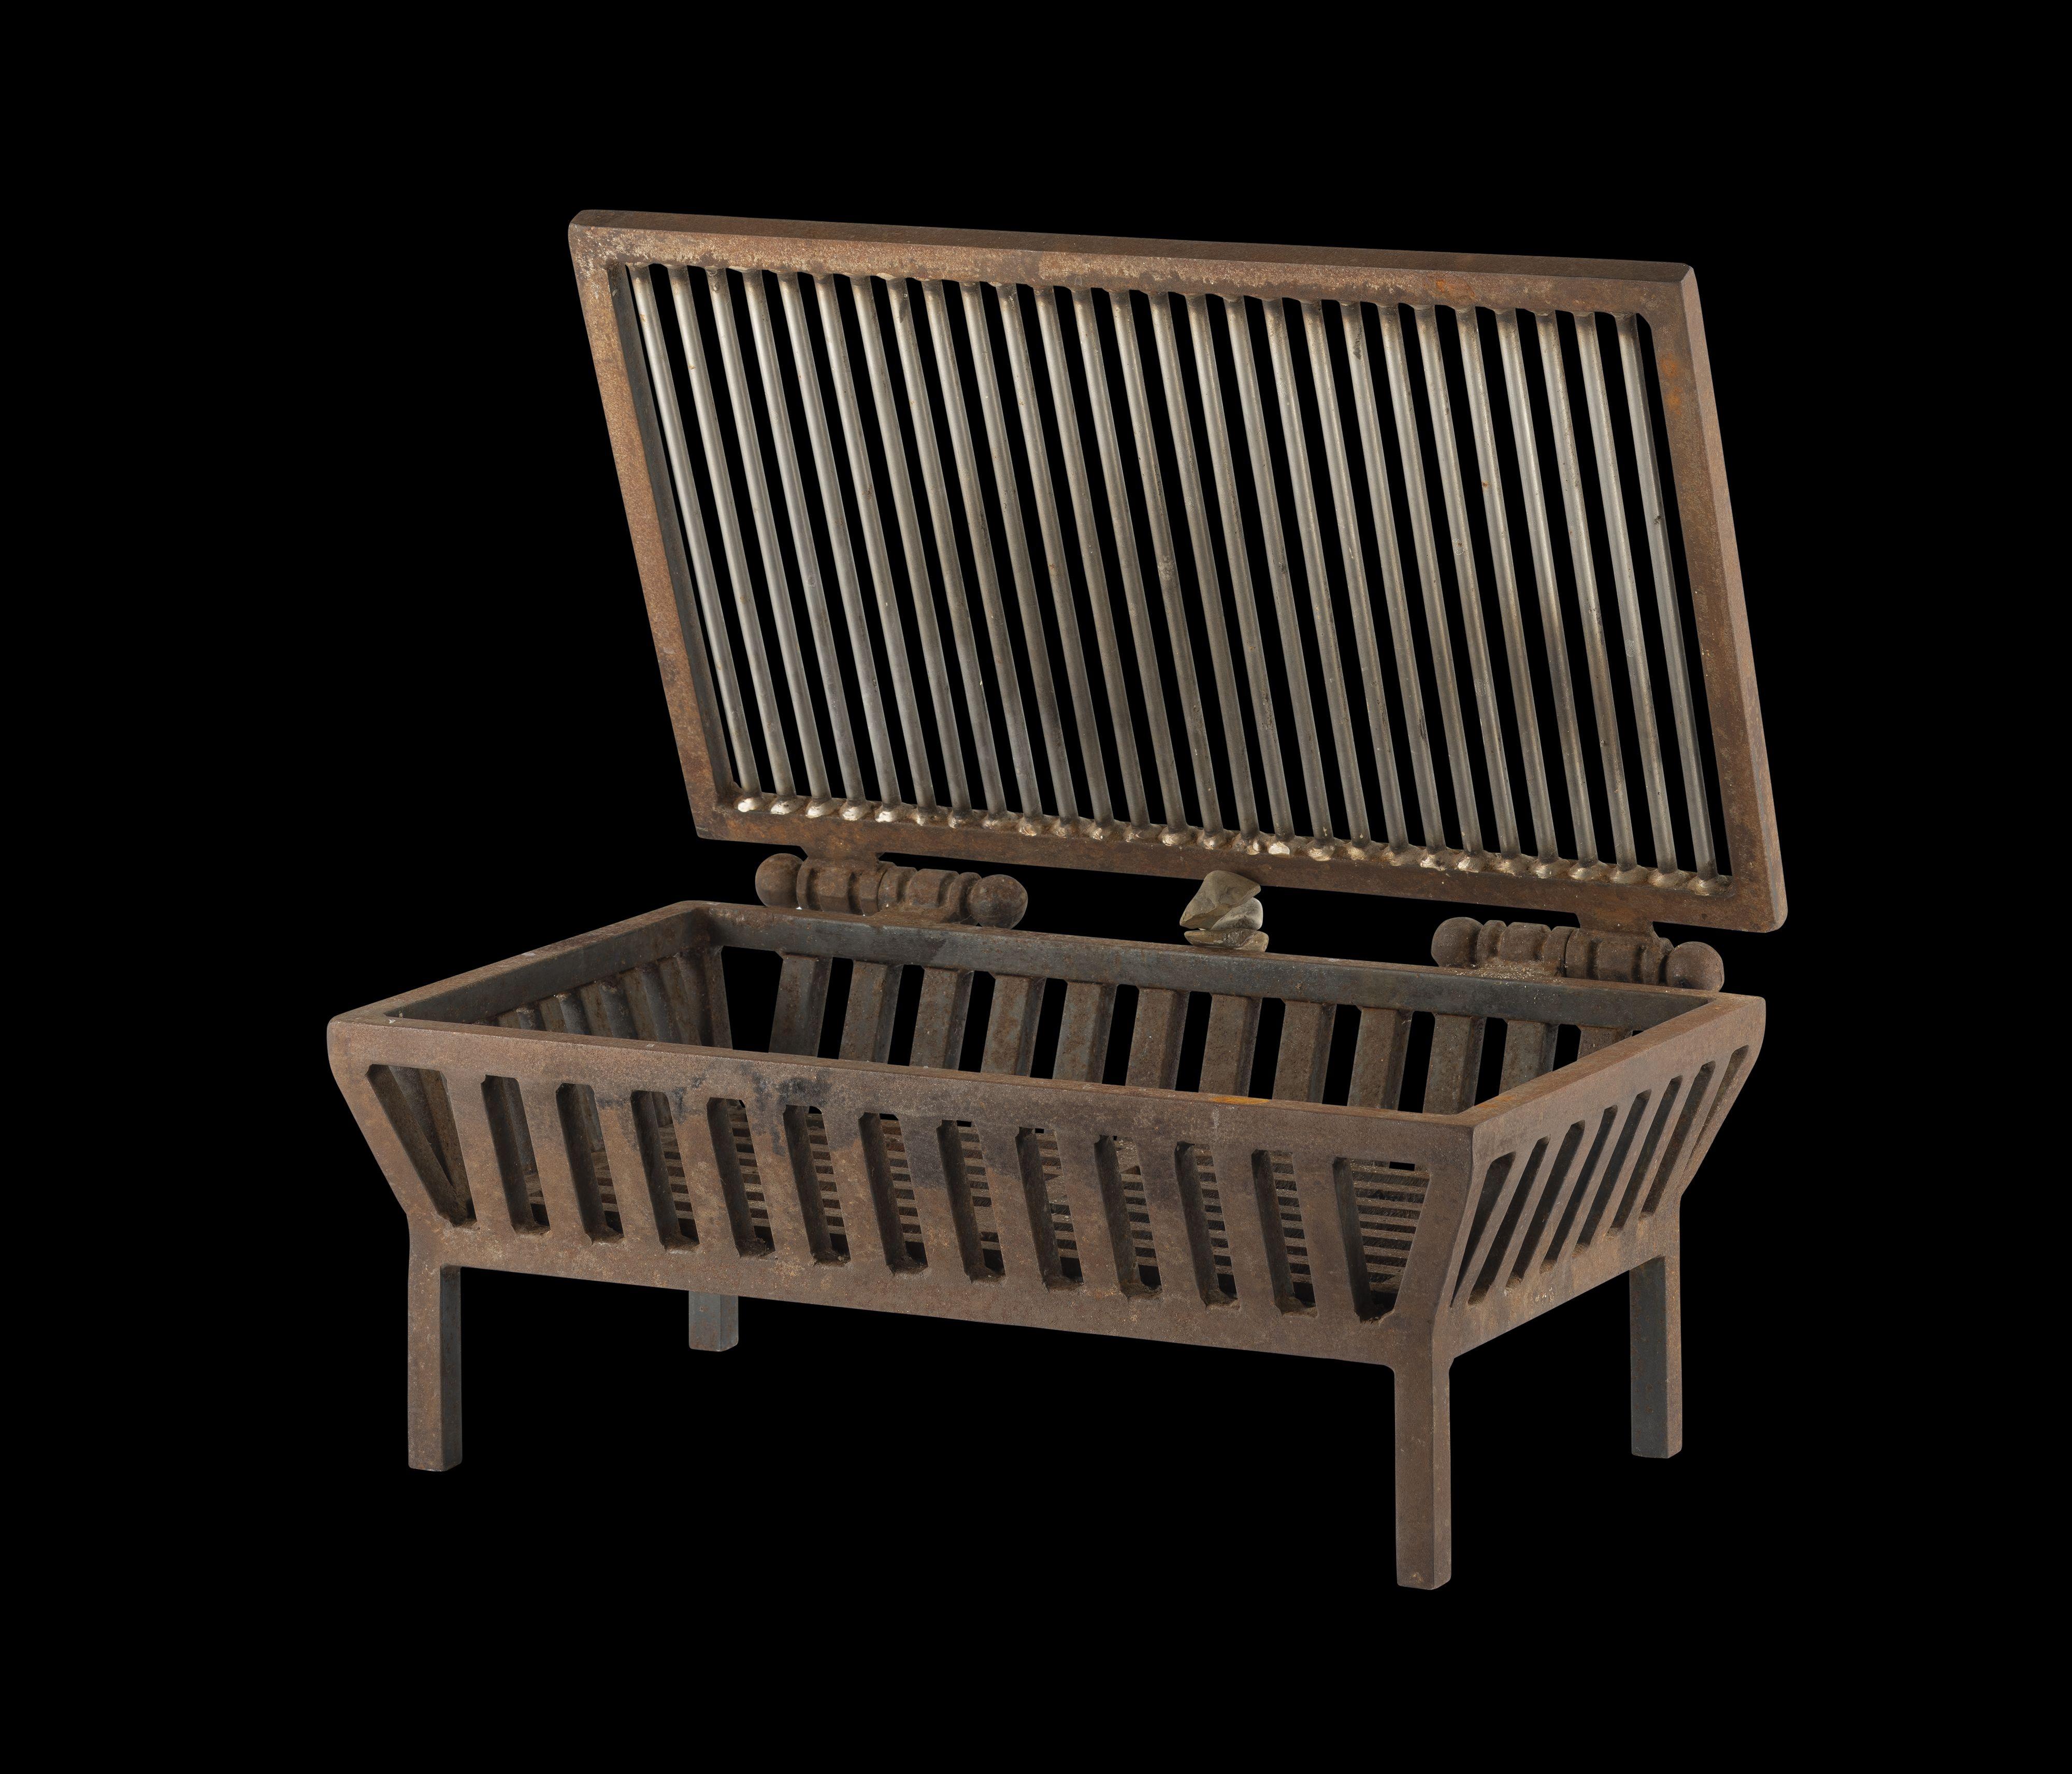 cast iron fire pit grill grate